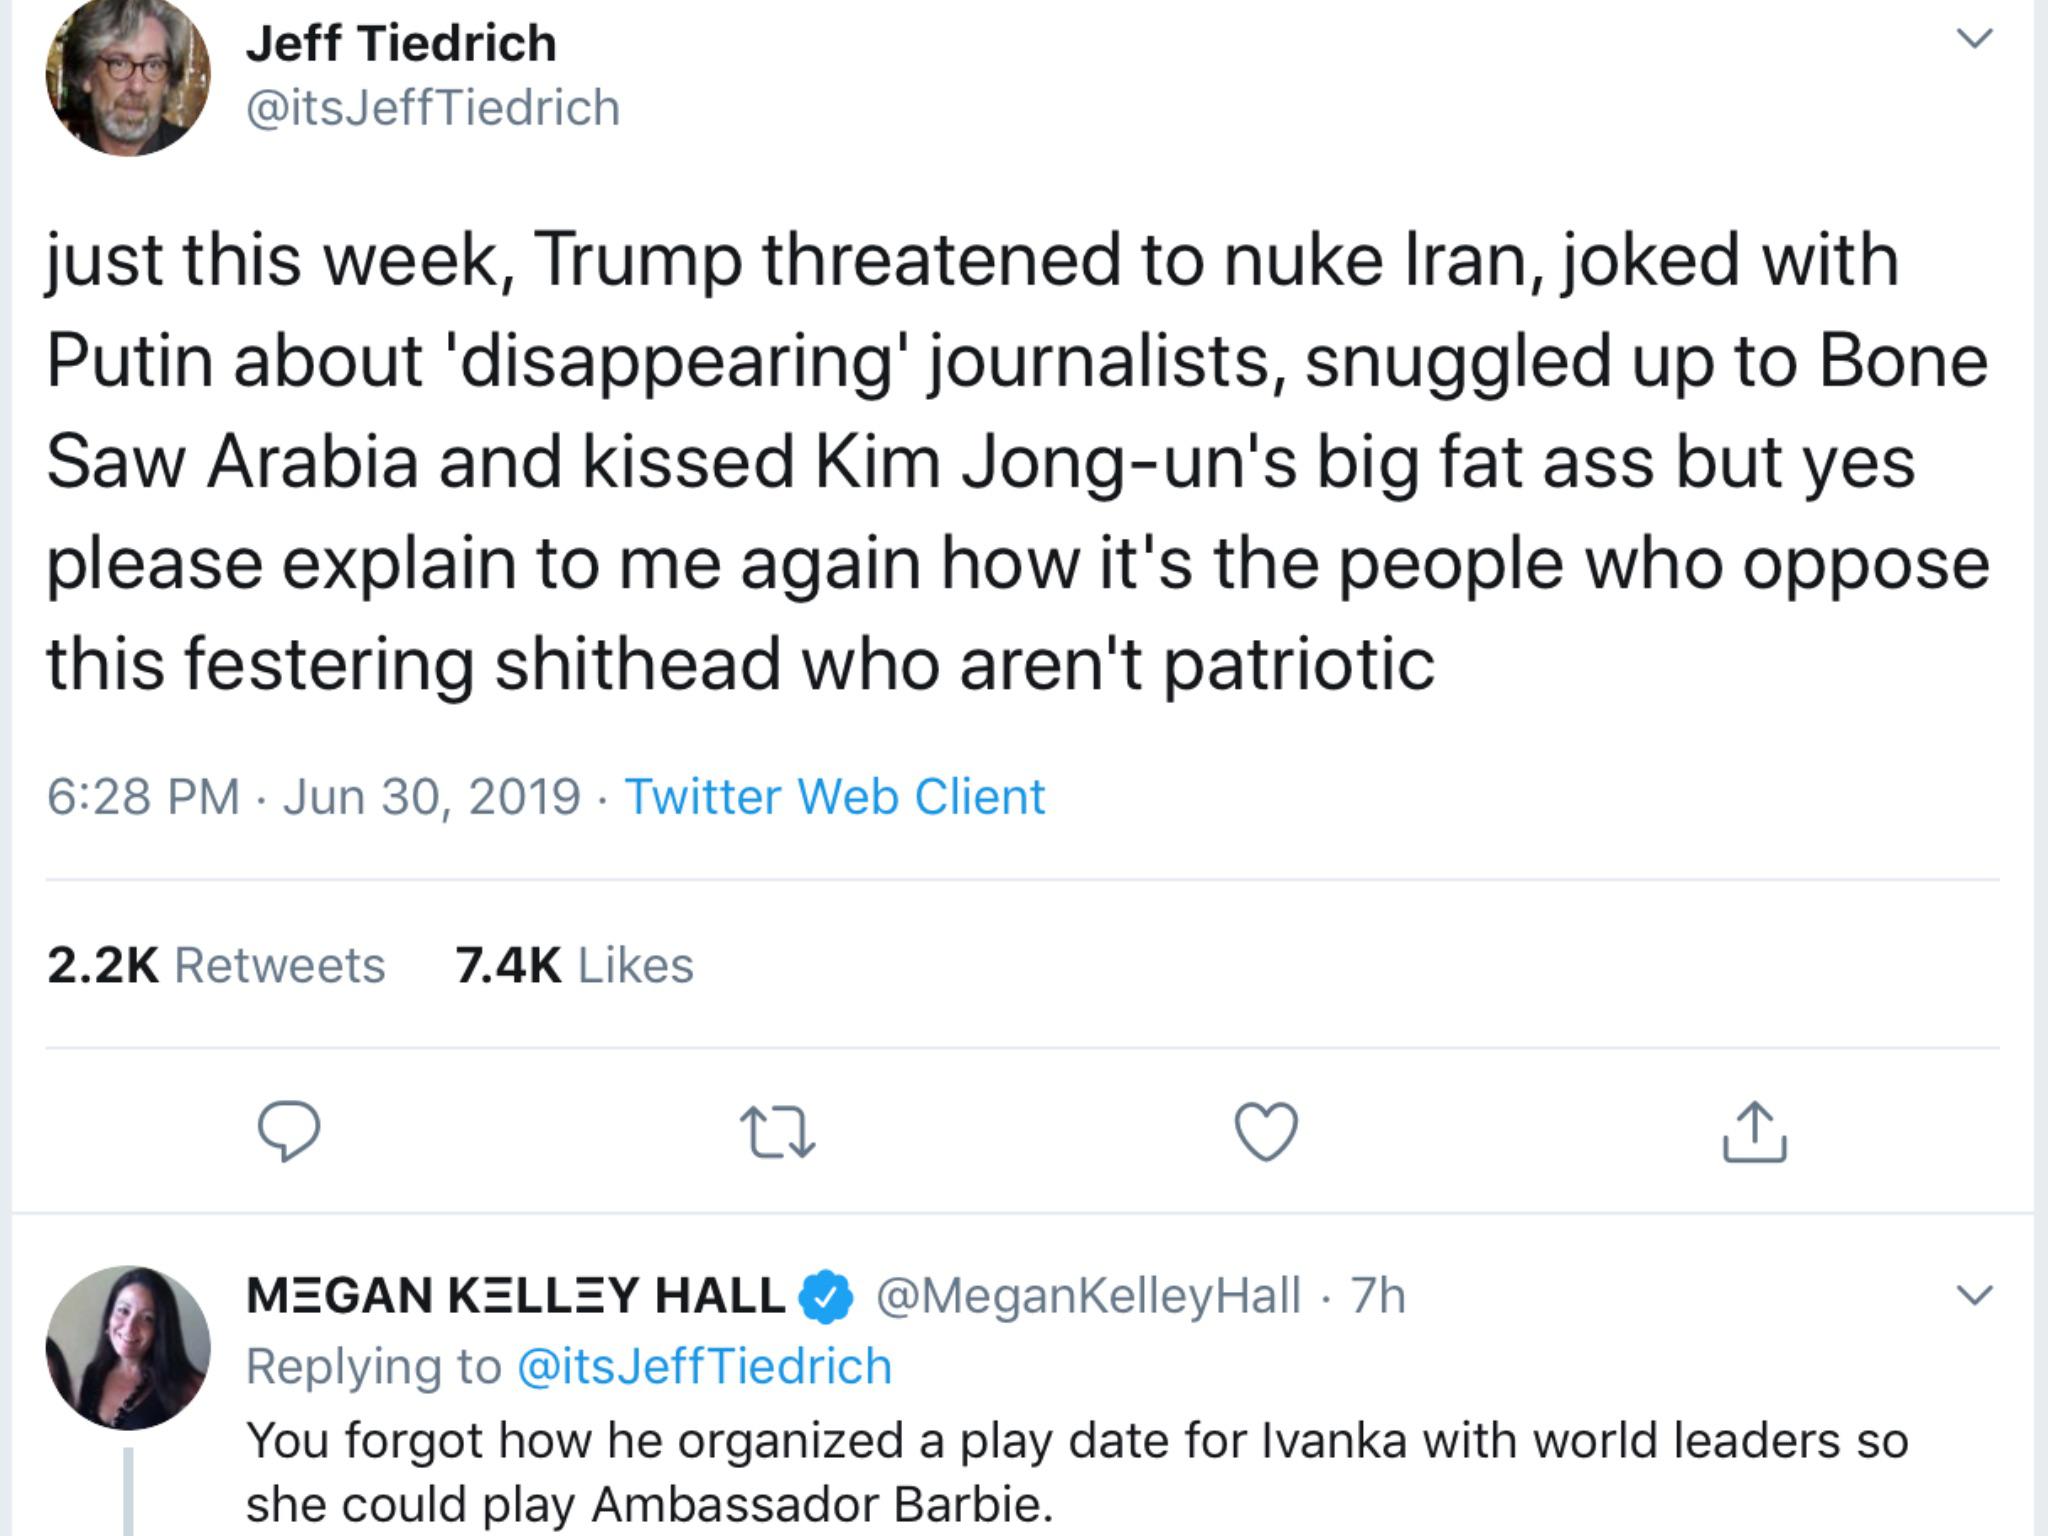 angle - Jeff Tiedrich JeffTiedrich just this week, Trump threatened to nuke Iran, joked with Putin about 'disappearing' journalists, snuggled up to Bone Saw Arabia and kissed Kim Jongun's big fat ass but yes please explain to me again how it's the people 